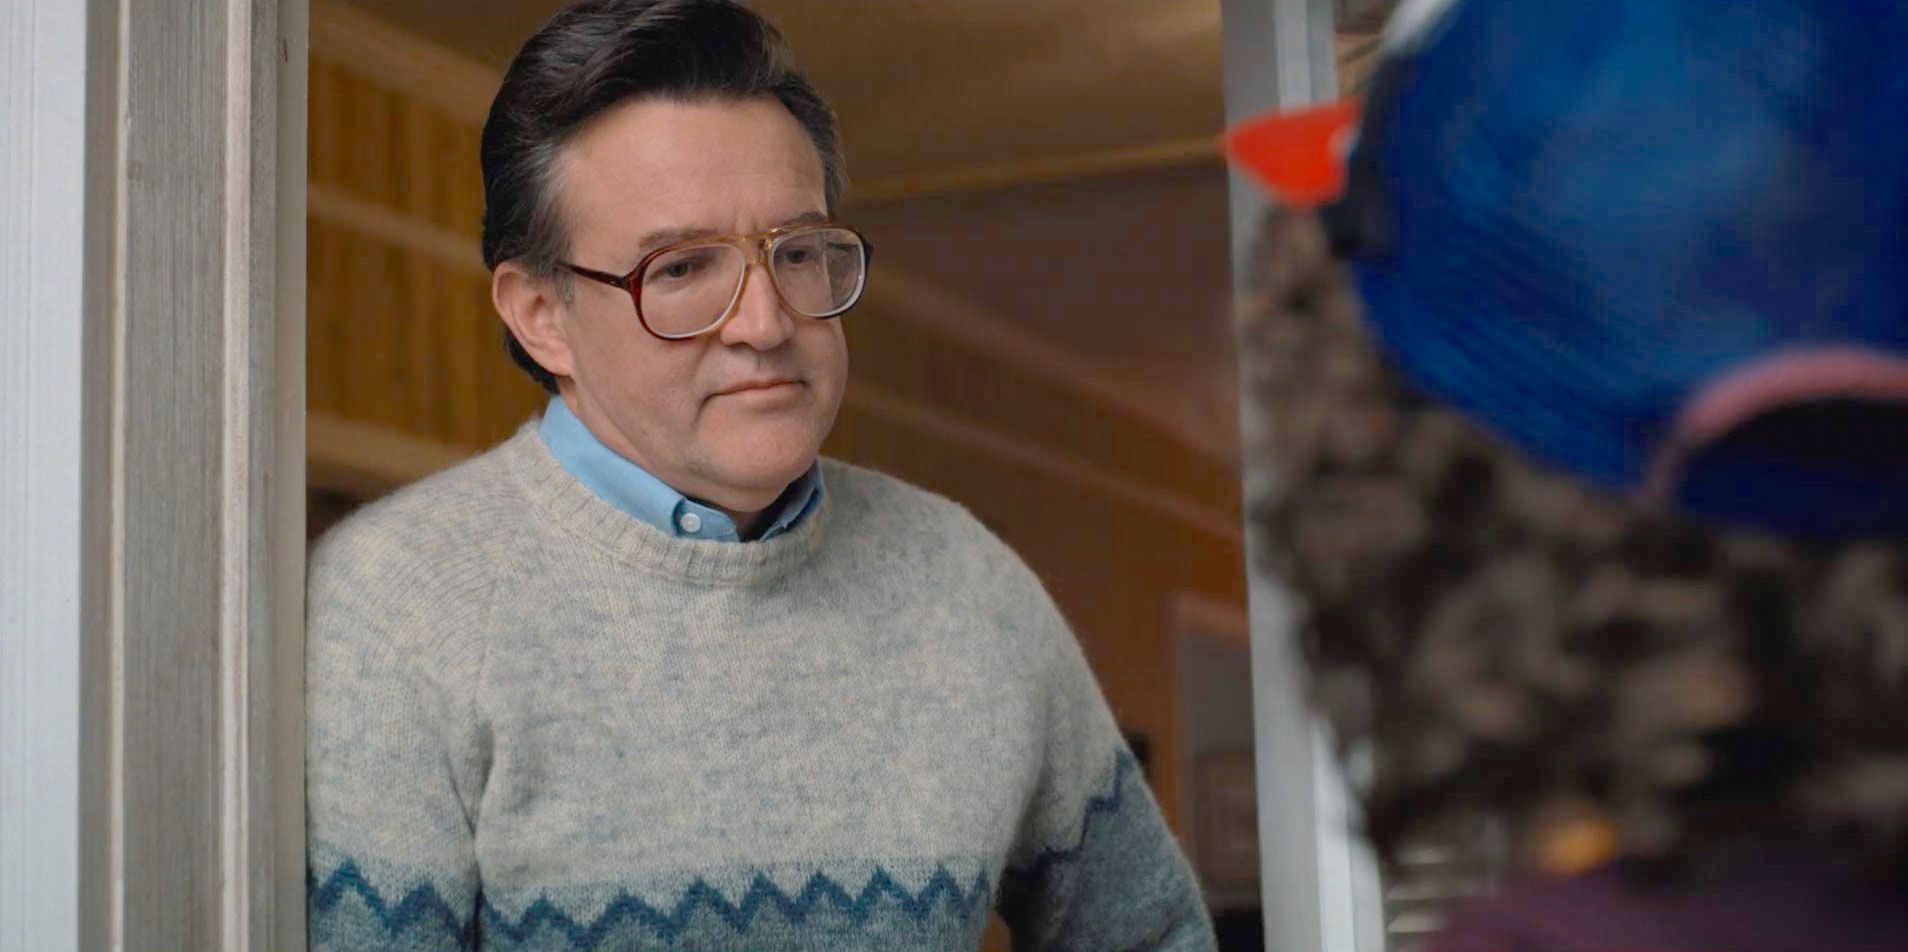 Who Is Will's Dad in Stranger Things? Find out Which Man Is His Father